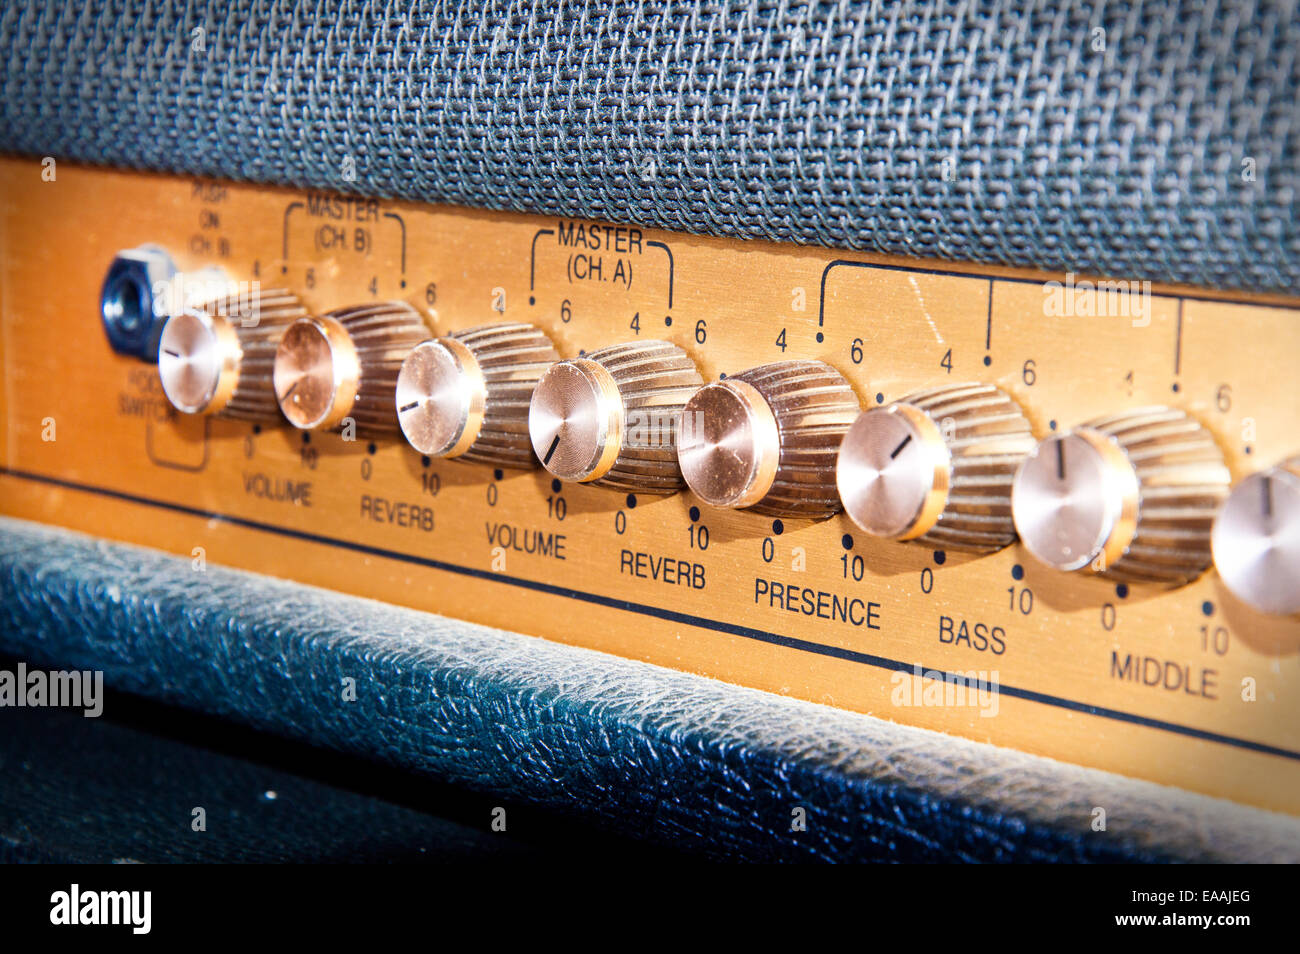 Sound volume controls of vintage guitar amplifier. Music and sound conceptual image. Stock Photo